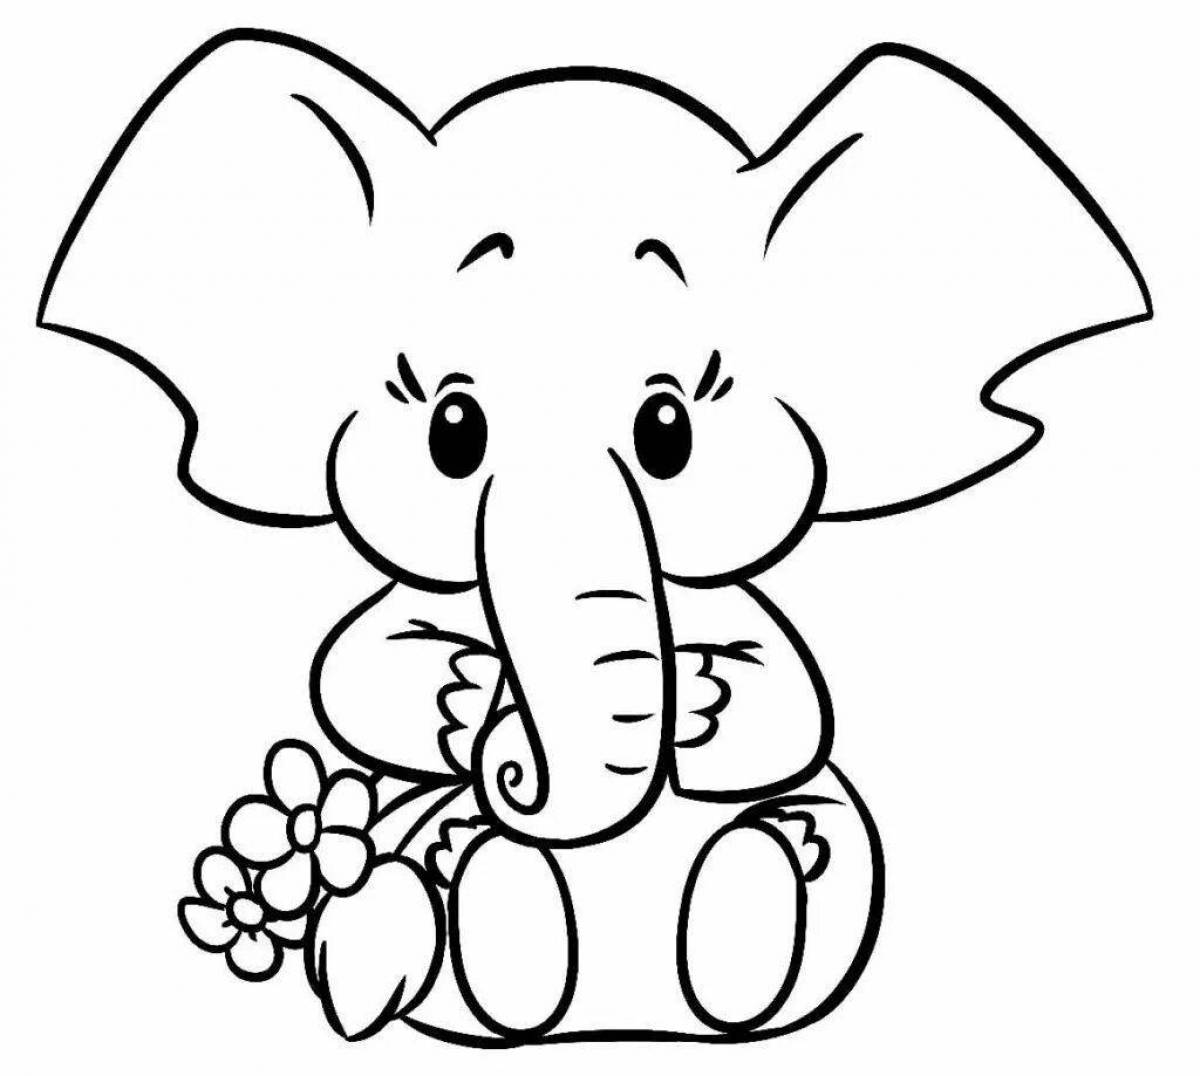 Playful elephant coloring page for kids